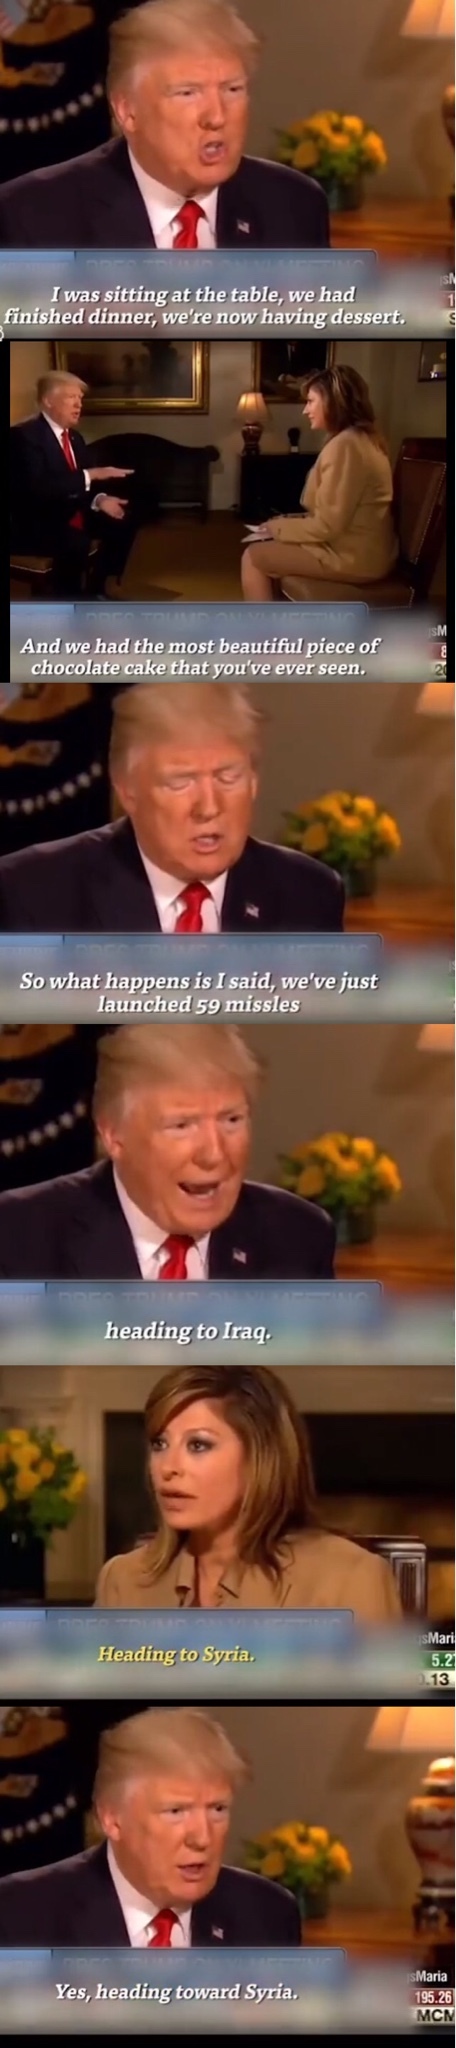 He remembers the cake but not what country he bombed? - meme